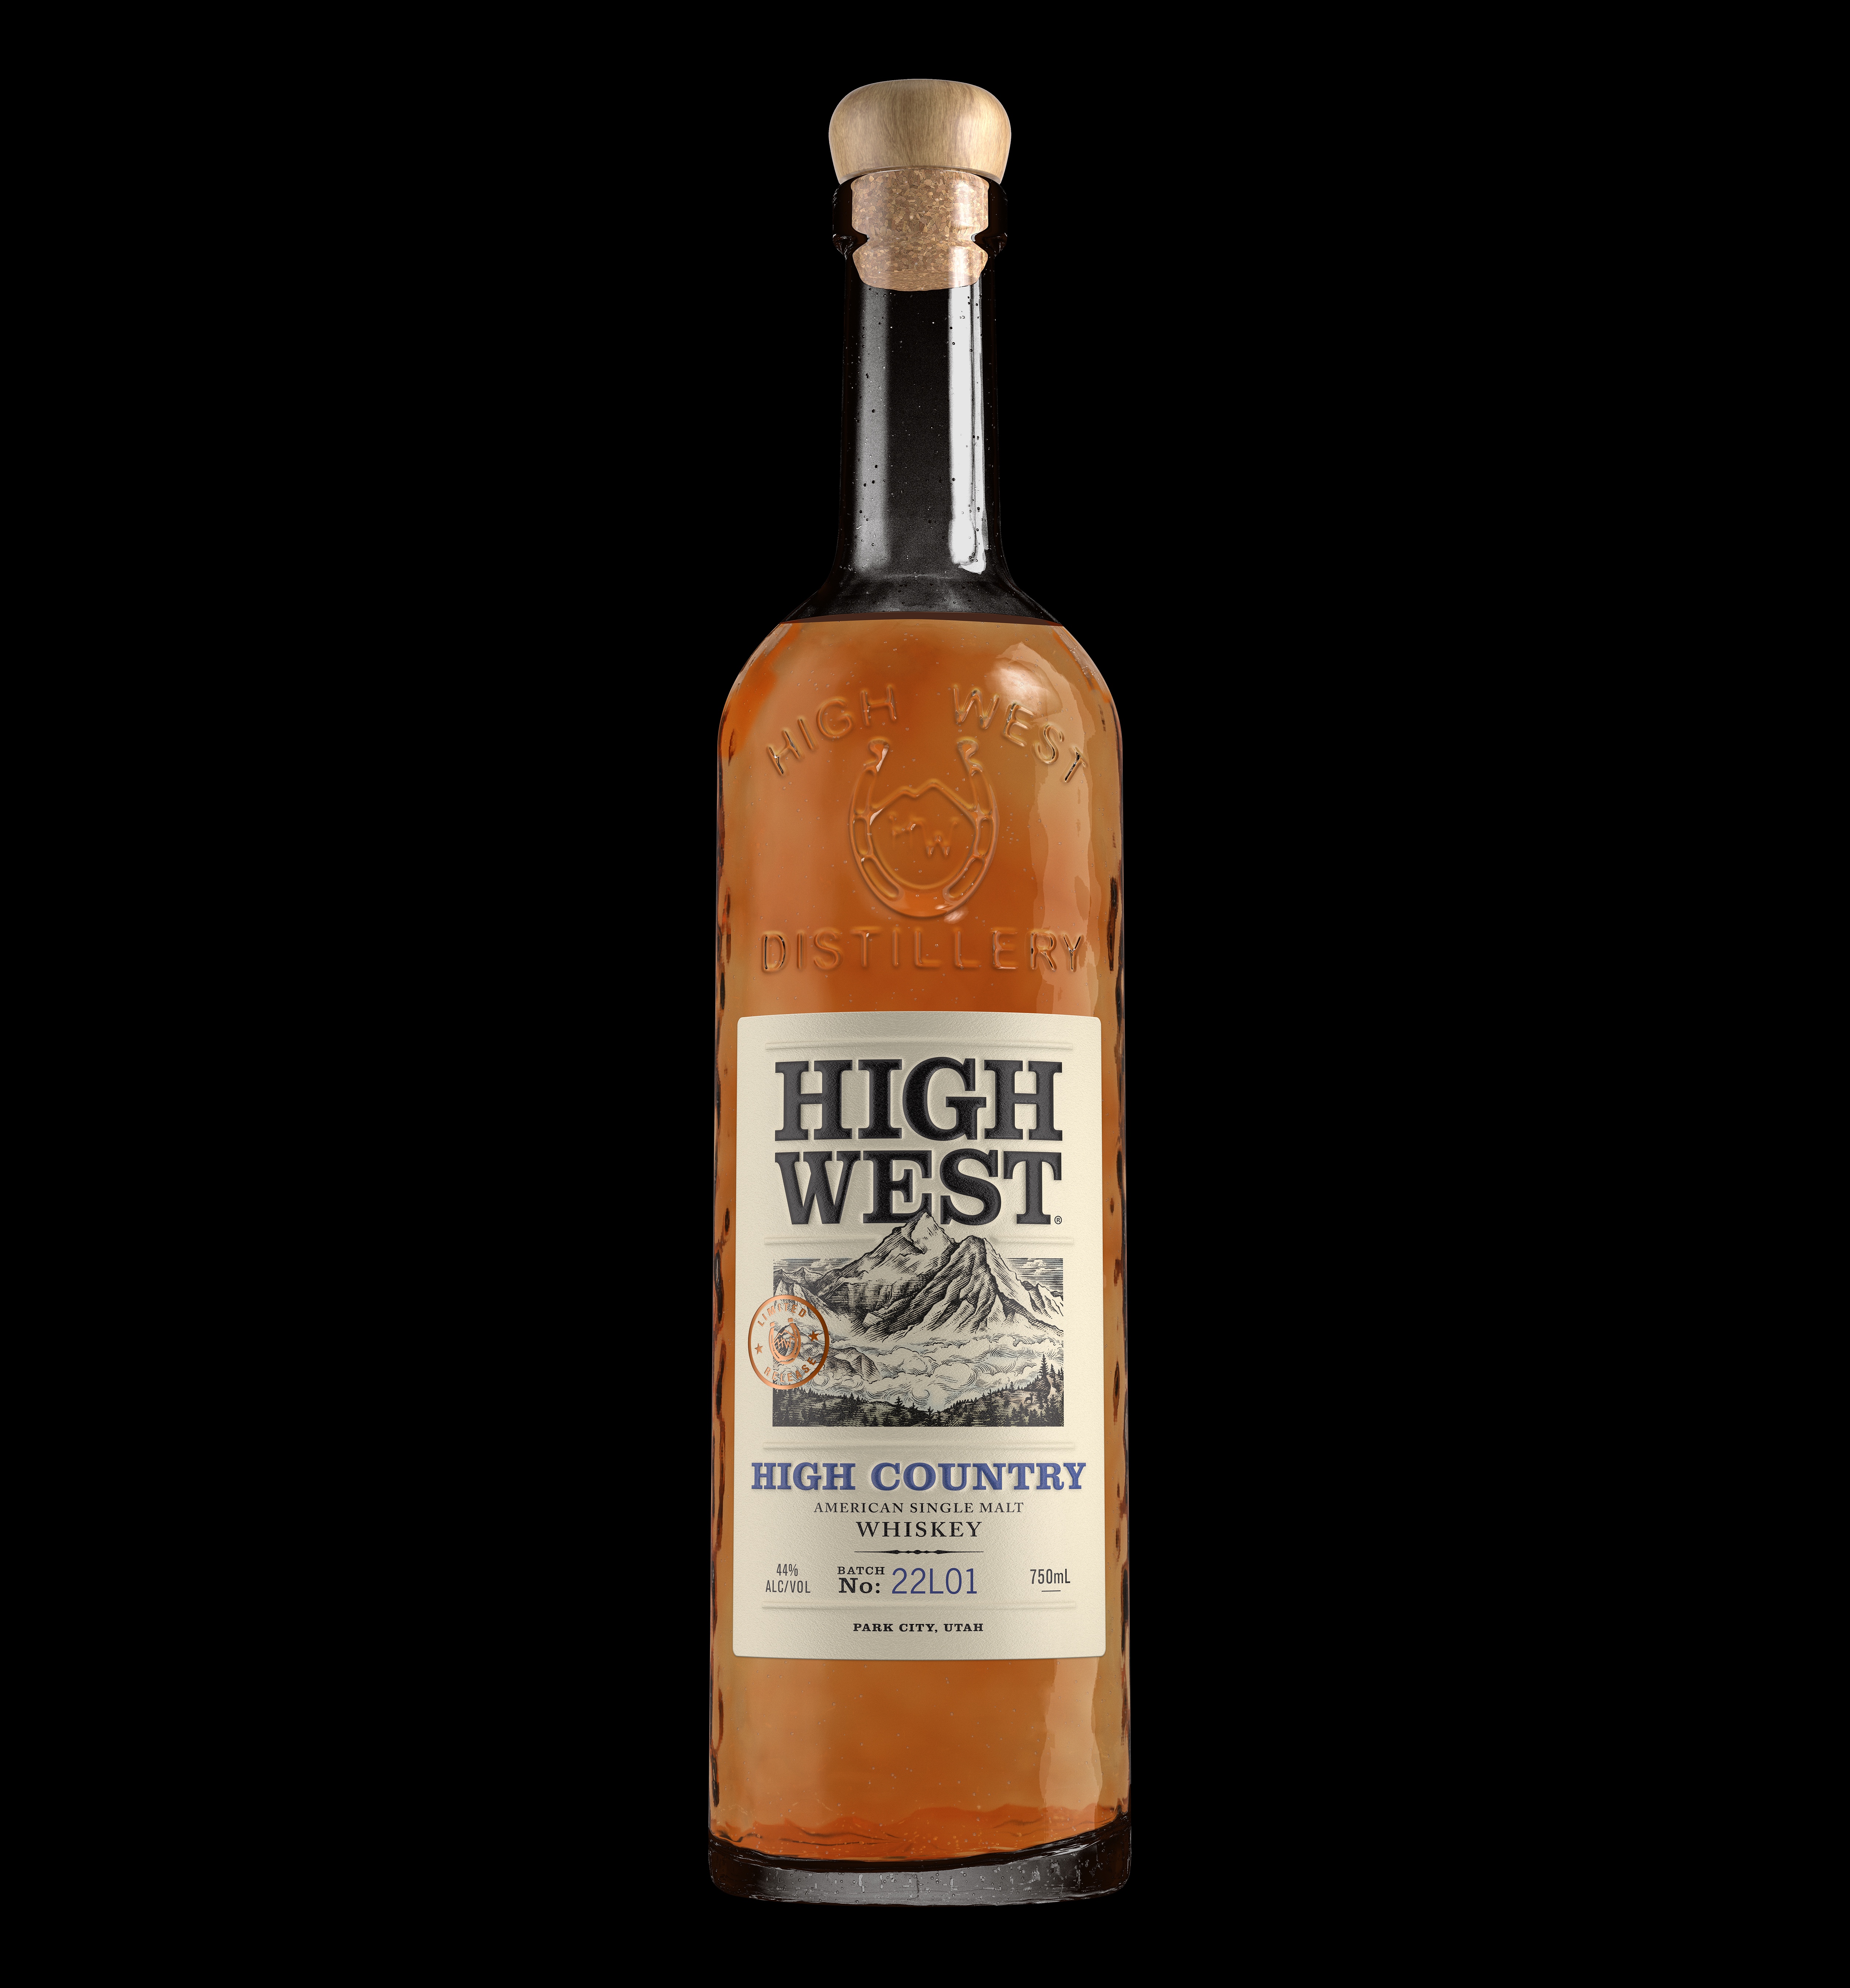 High West Announces New Batch of High Country American Single Malt Whiskey